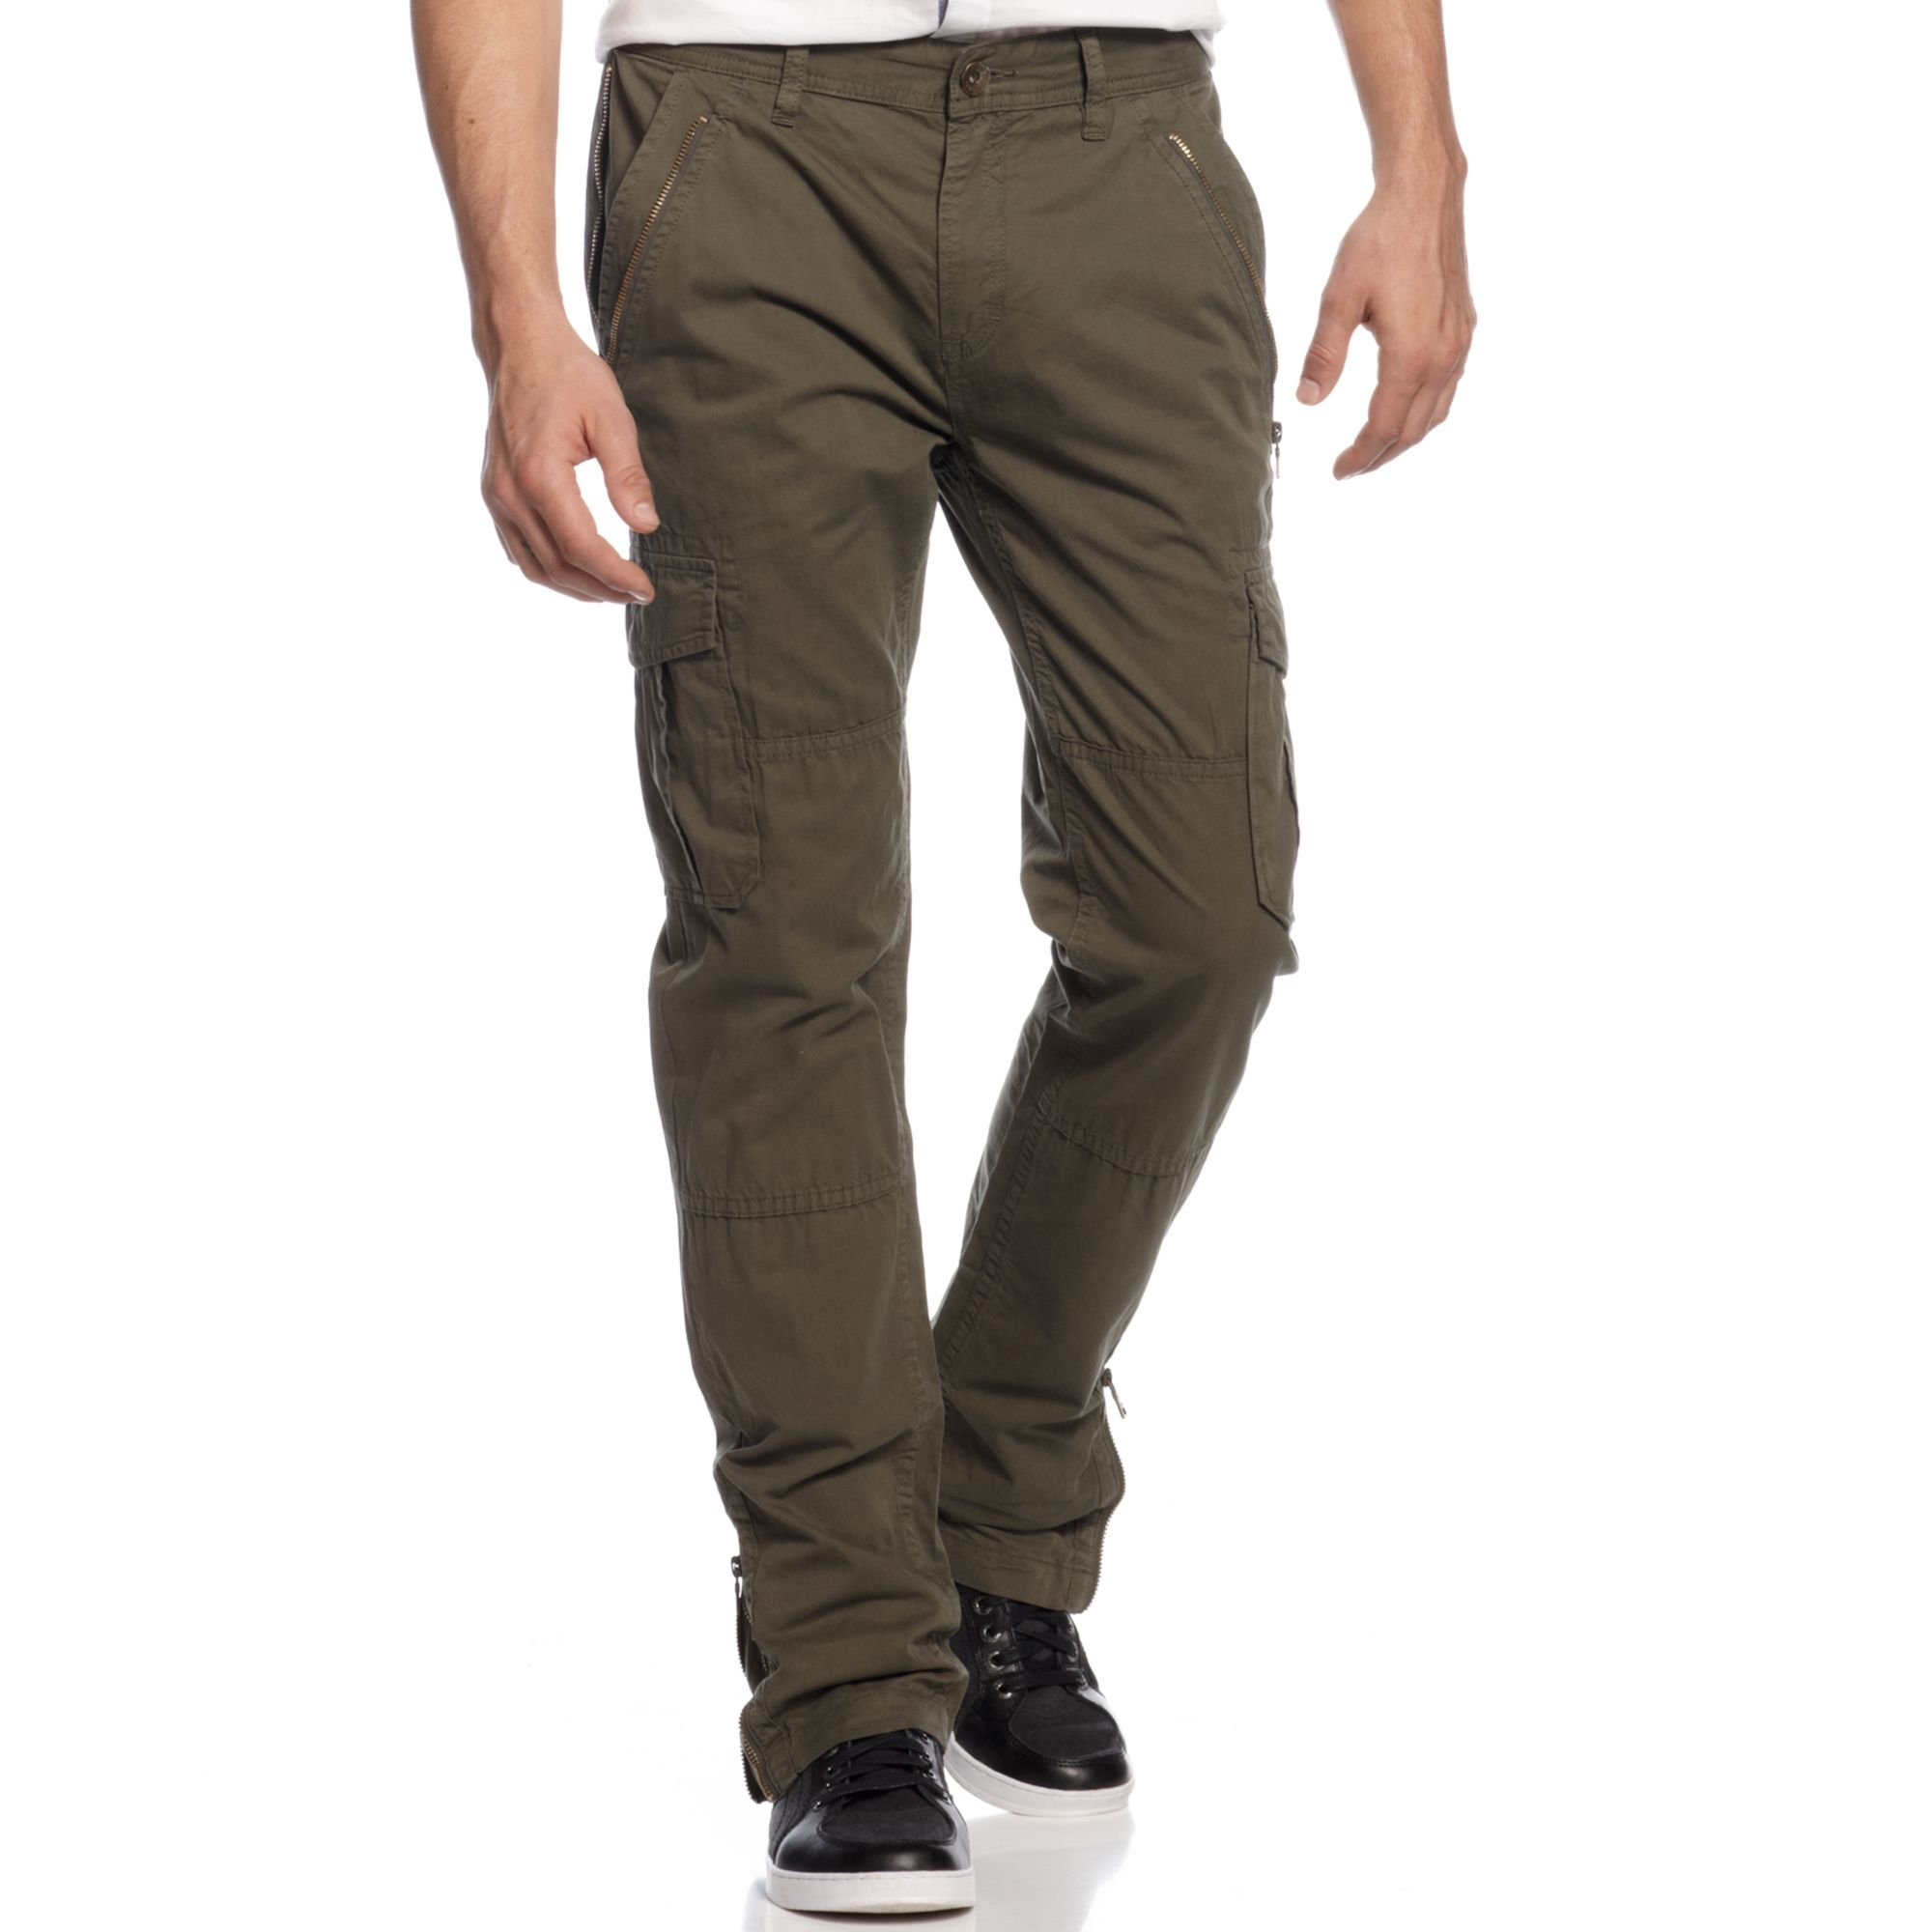 Guess Iconic Twill Cargo Pants in Green for Men - Lyst